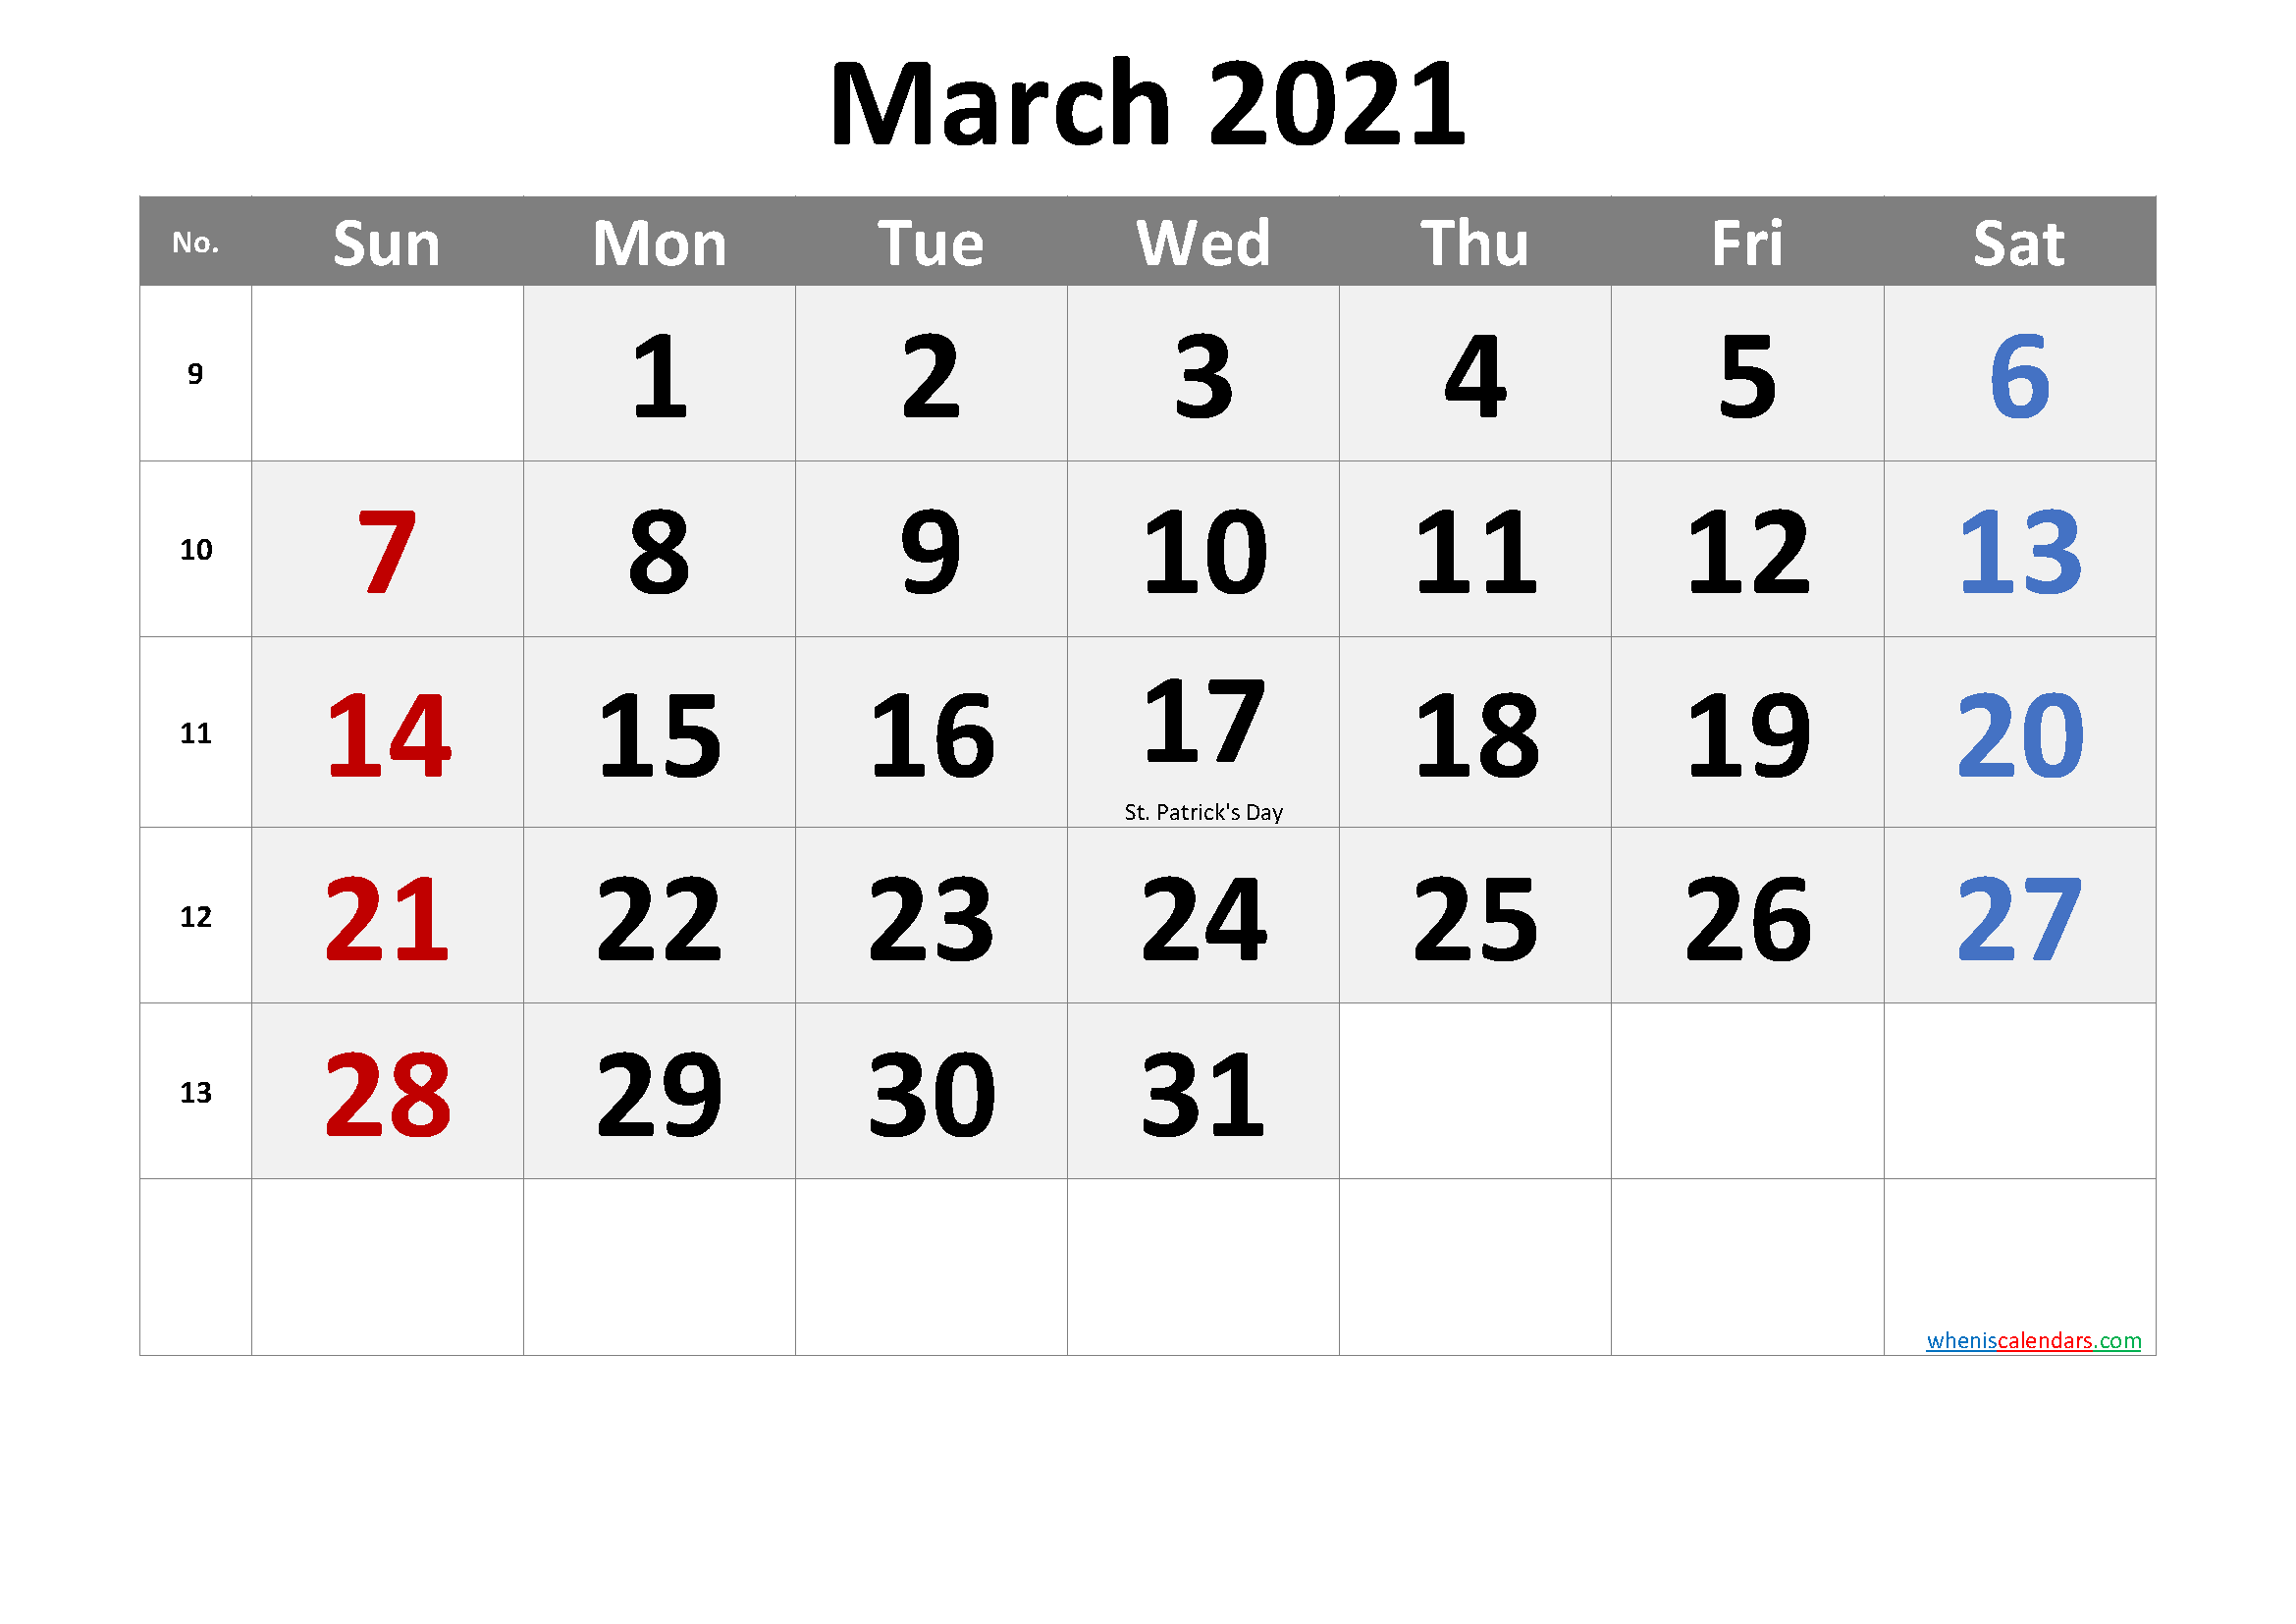 MARCH 2021 Printable Calendar with Holidays